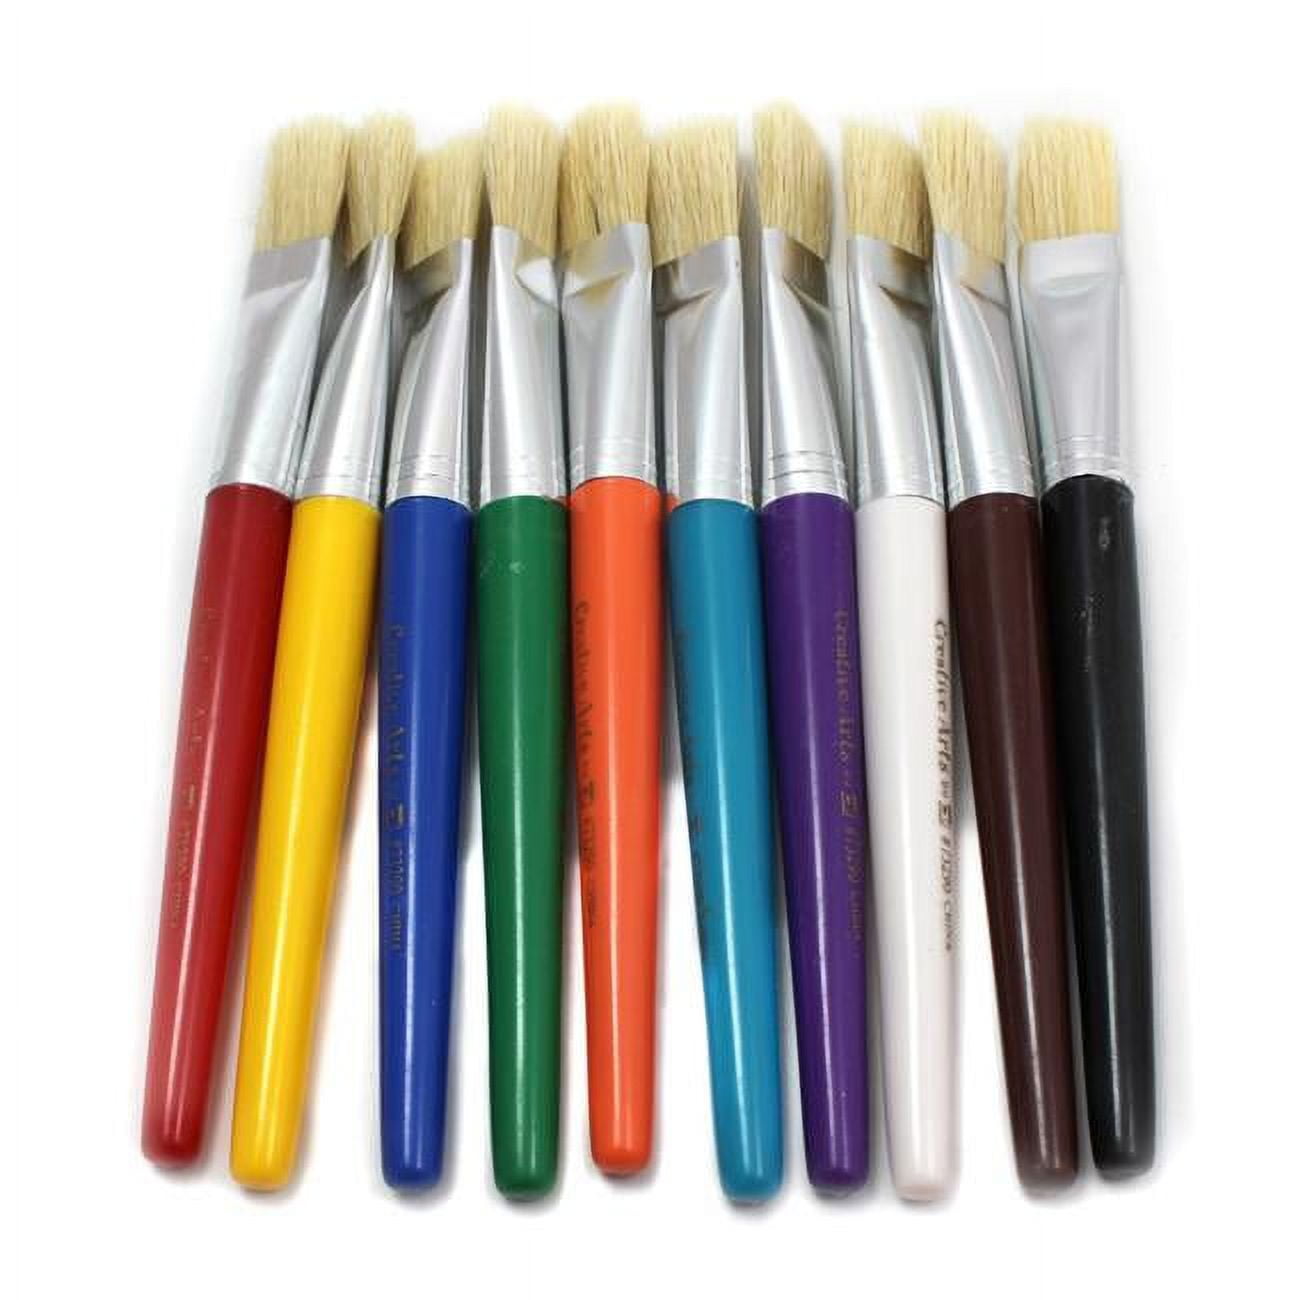 Bright Creations Texture Paint Brushes for Kids and Toddlers, Easy Grip (3.5 x 2 in, 5 Pieces)